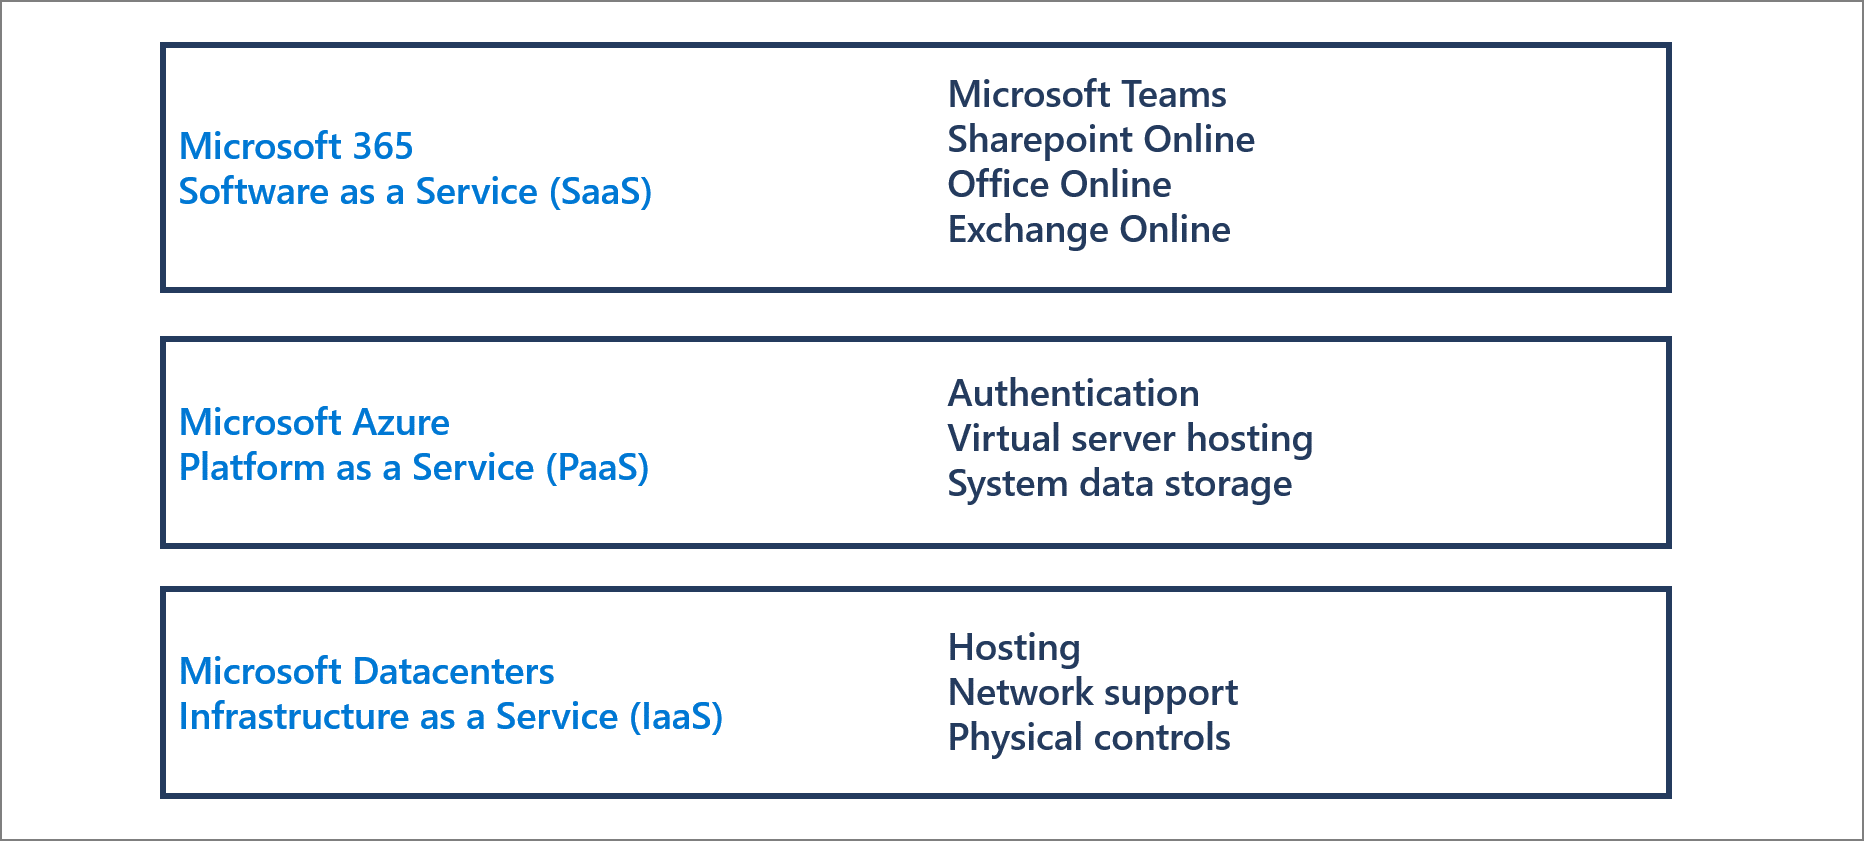 Diagramme montrant les distinctions entre Microsoft 365 Software as a service (SaaS), Microsoft Azure Platform as a service (PaaS) et Microsoft datacenters infrastructure as a service (IaaS).